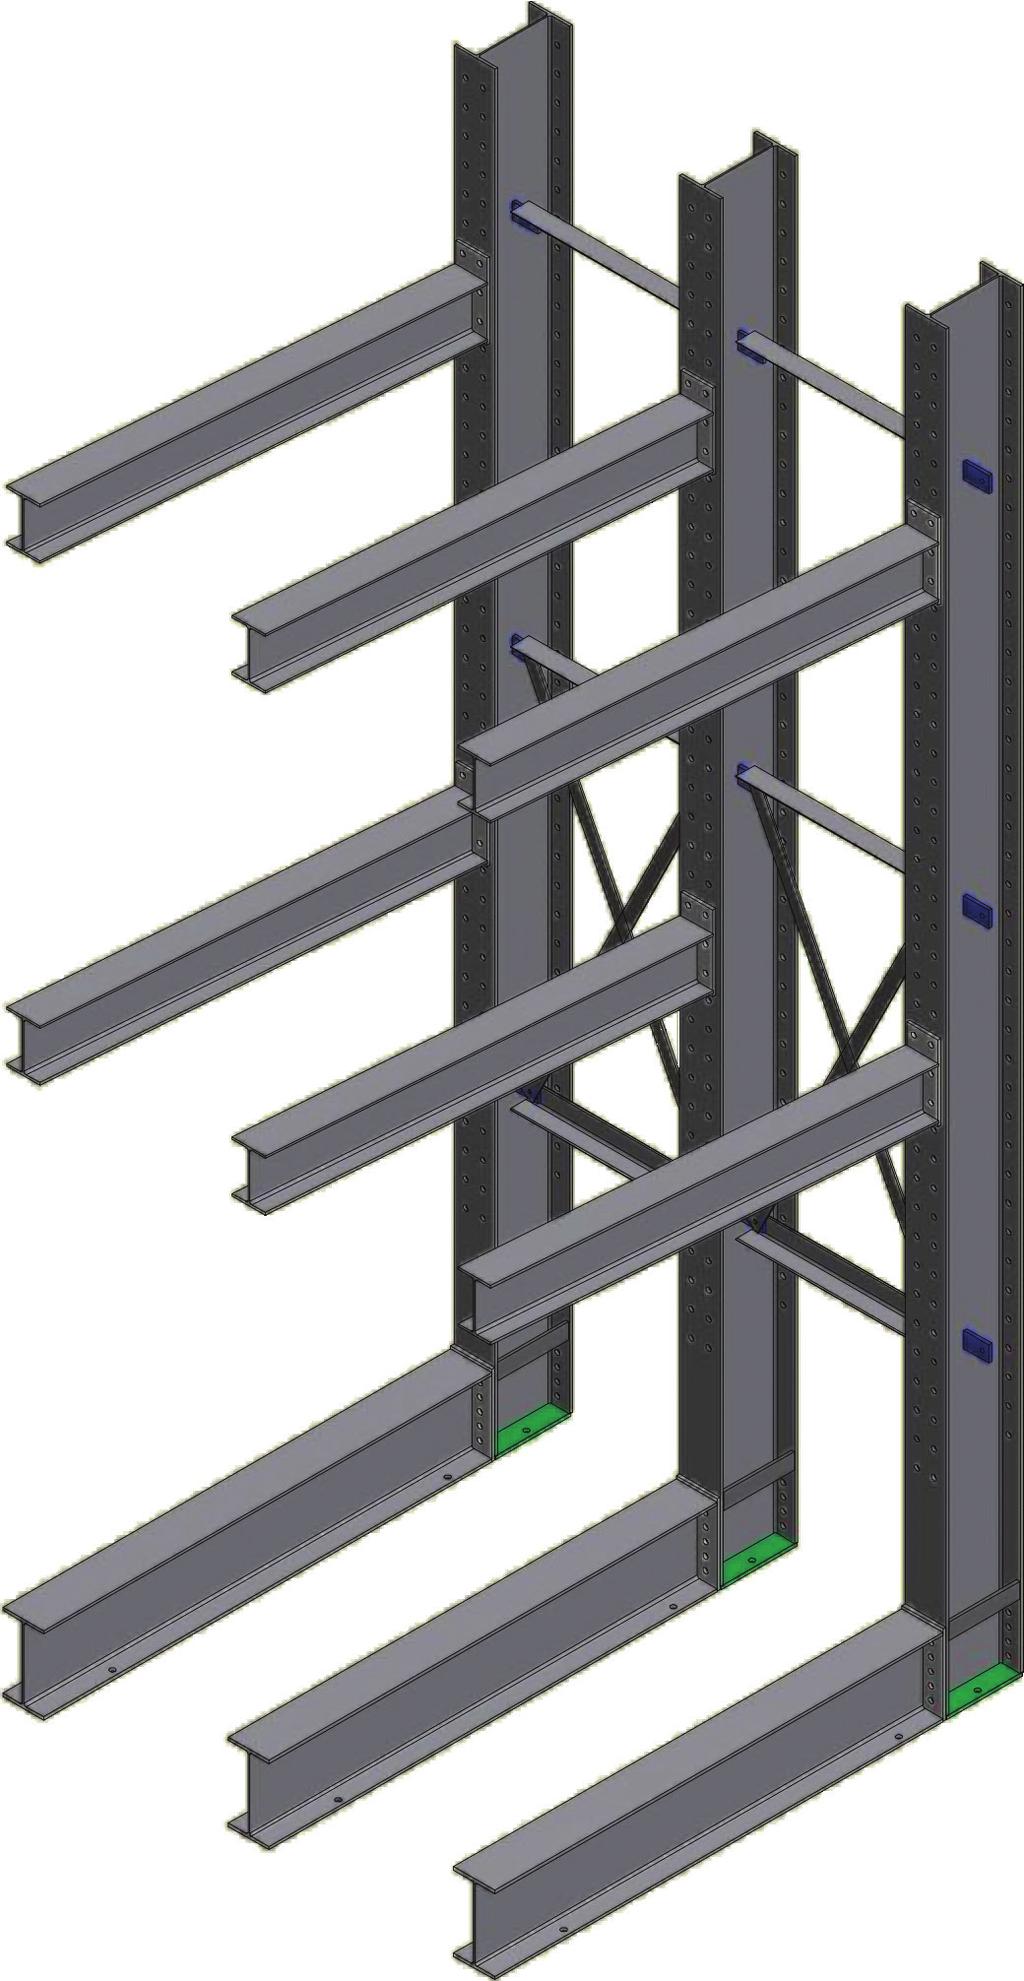 Standard Features Dexco Rack Systems are engineered using American Institute of Steel Construction (AISC) standards, which were developed to guide the design of large steel structures such as bridges